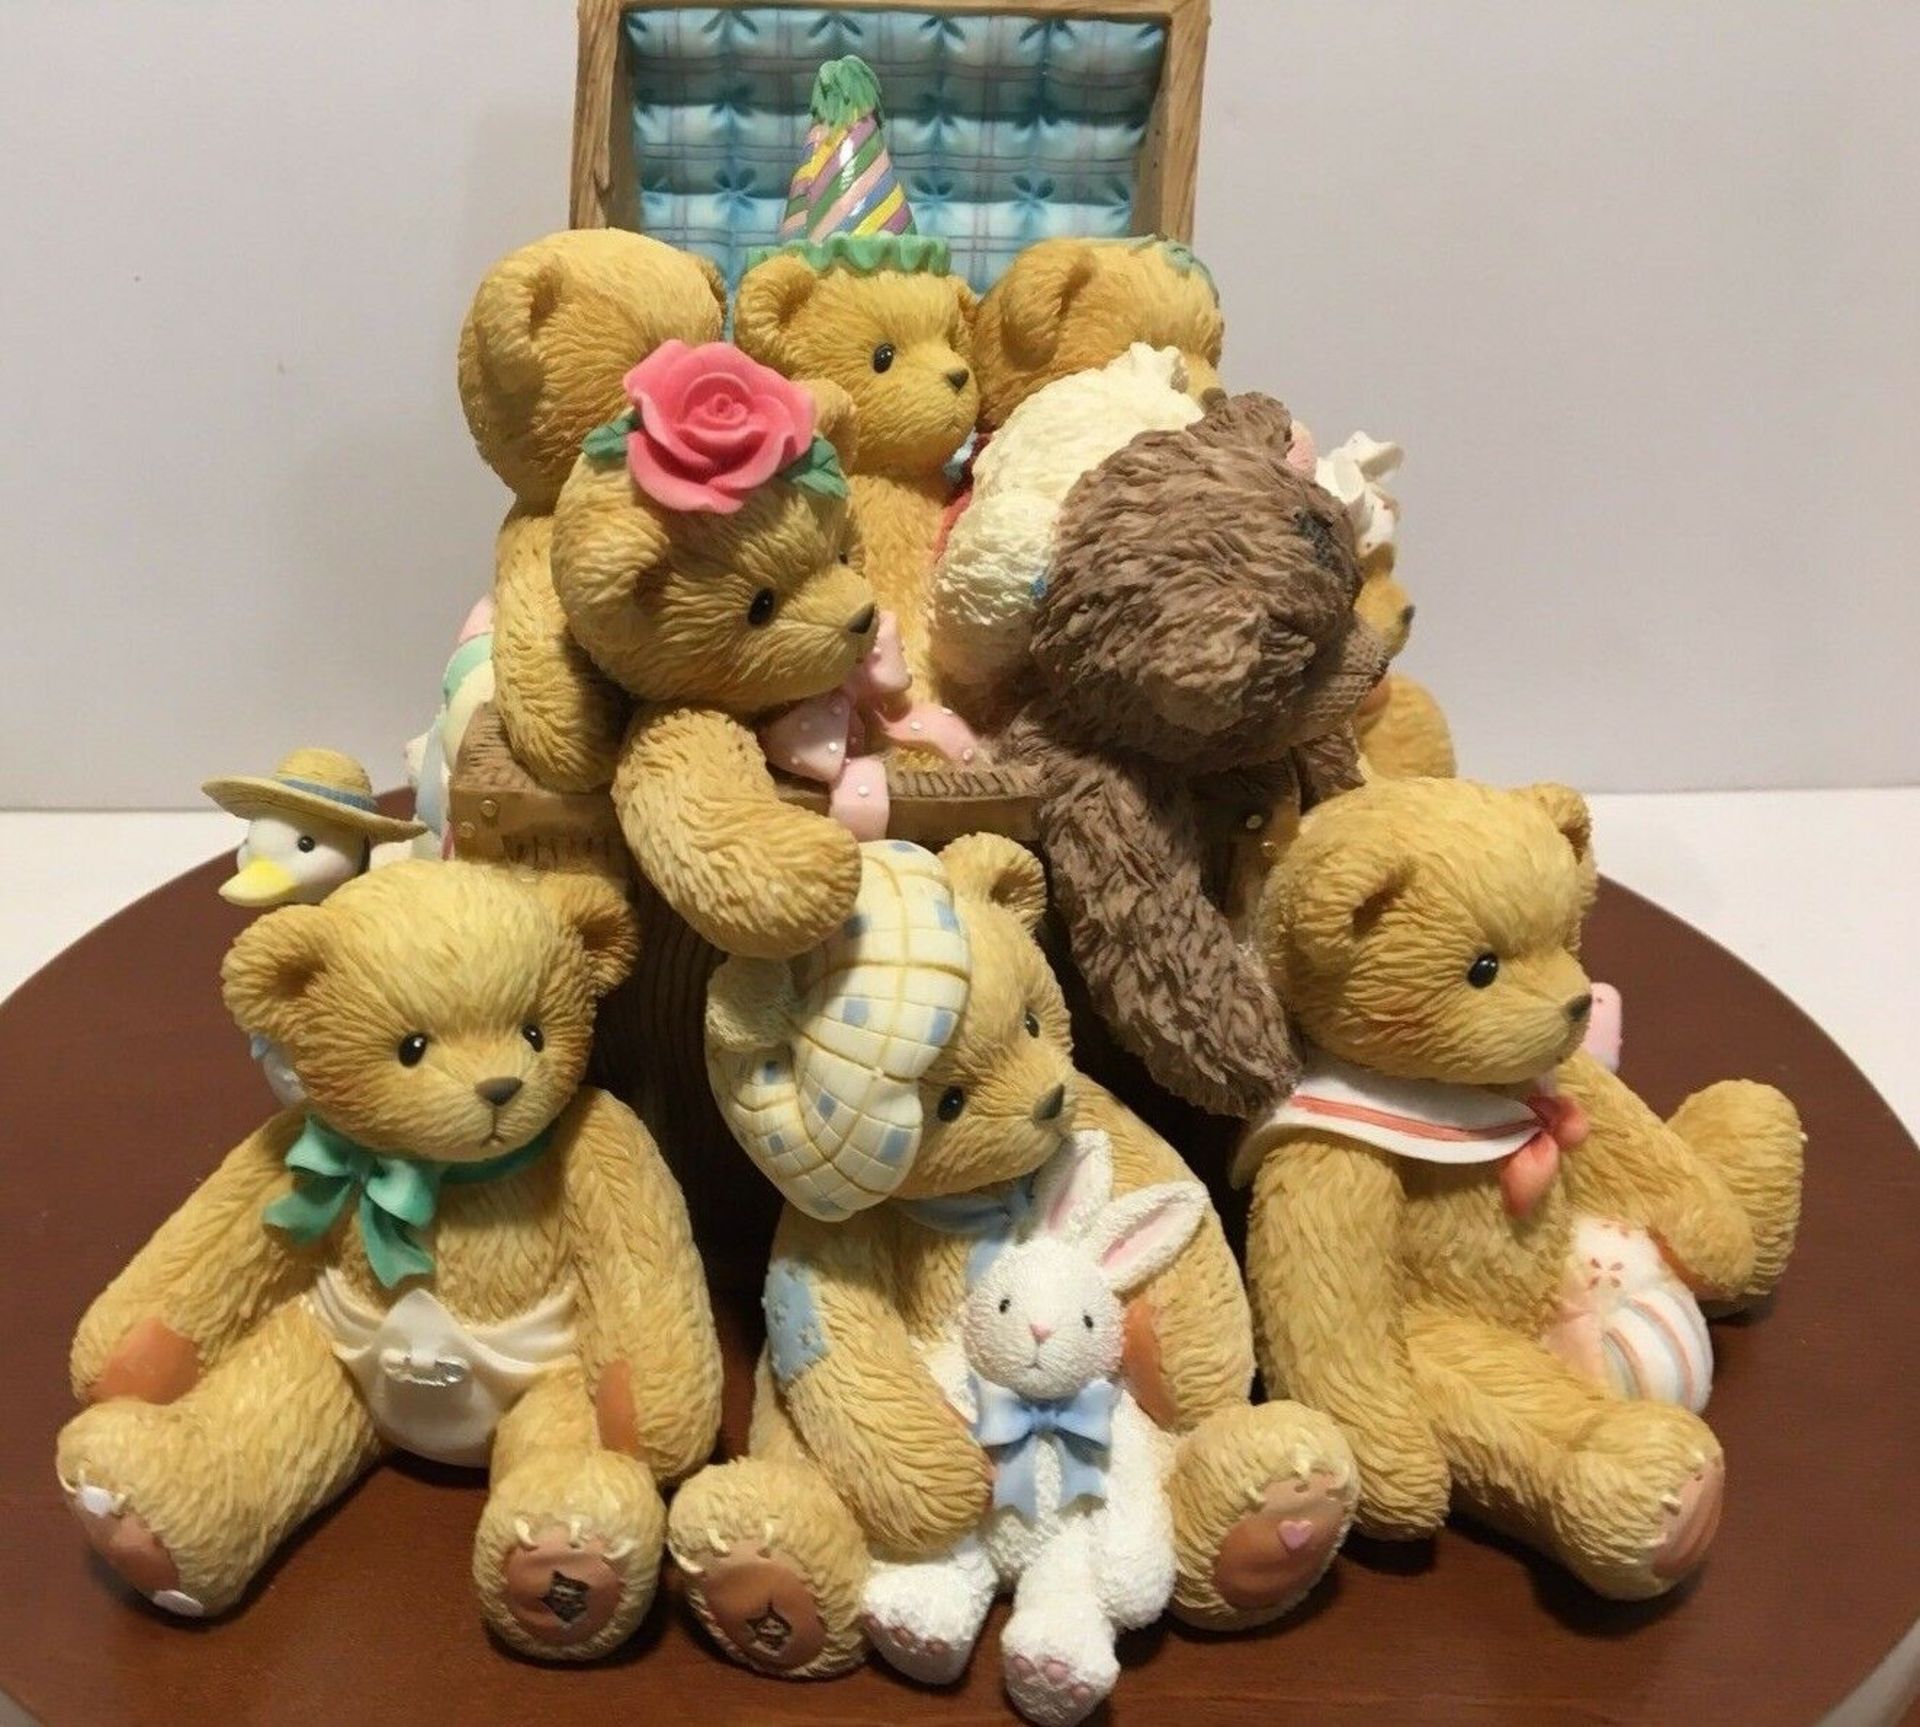 Cherished Teddy Rose Melinda Jacki. 10th Anniversary Retired For A day - Image 2 of 4